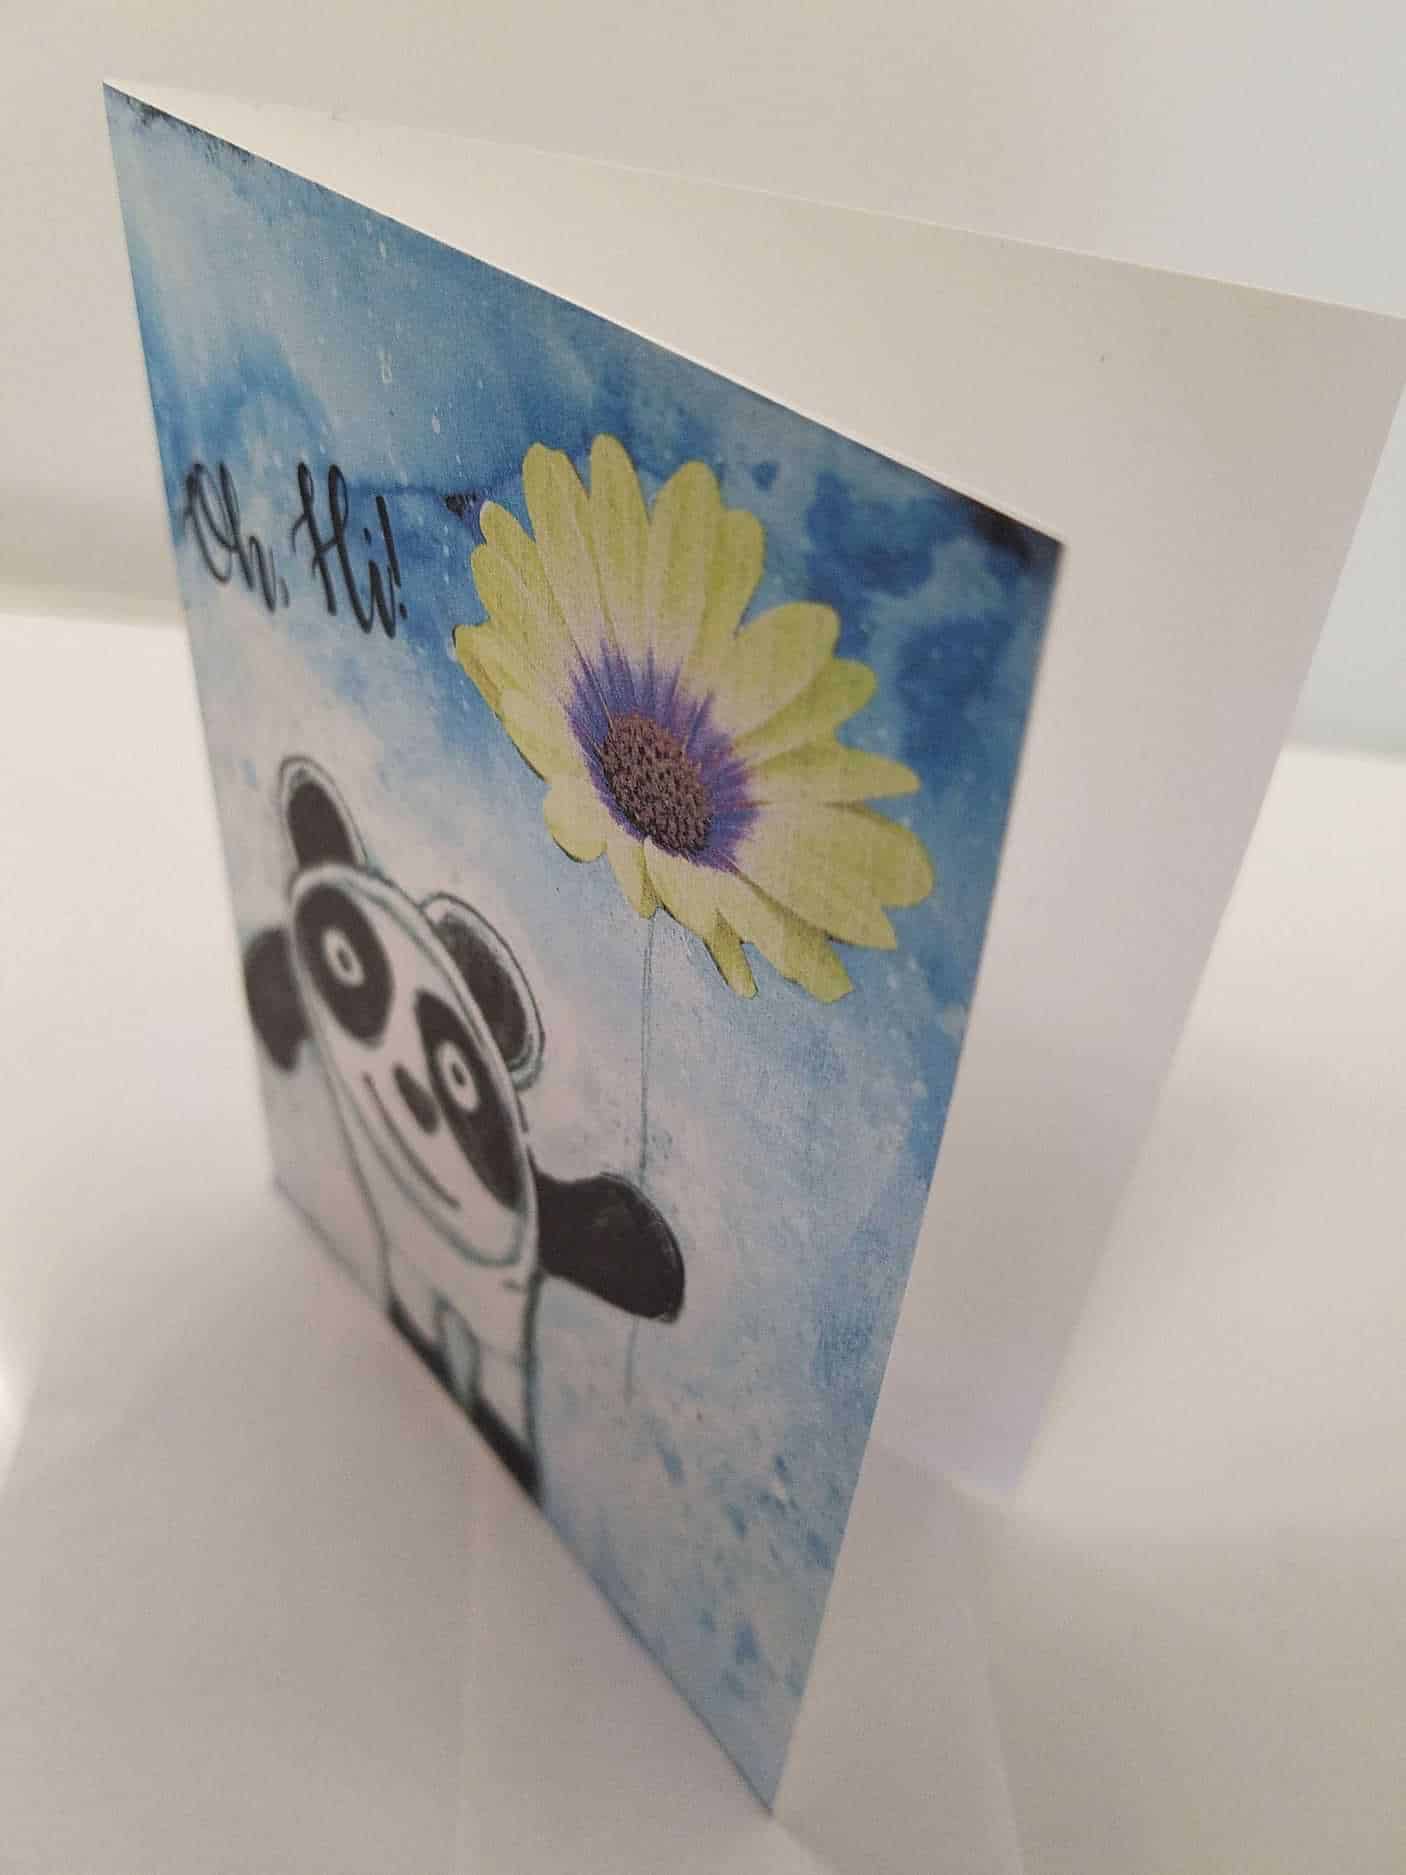 This "Oh, Hi!" Panda Note Card & Envelope, blank inside is made with love by Studio Patty D! Shop more unique gift ideas today with Spots Initiatives, the best way to support creators.